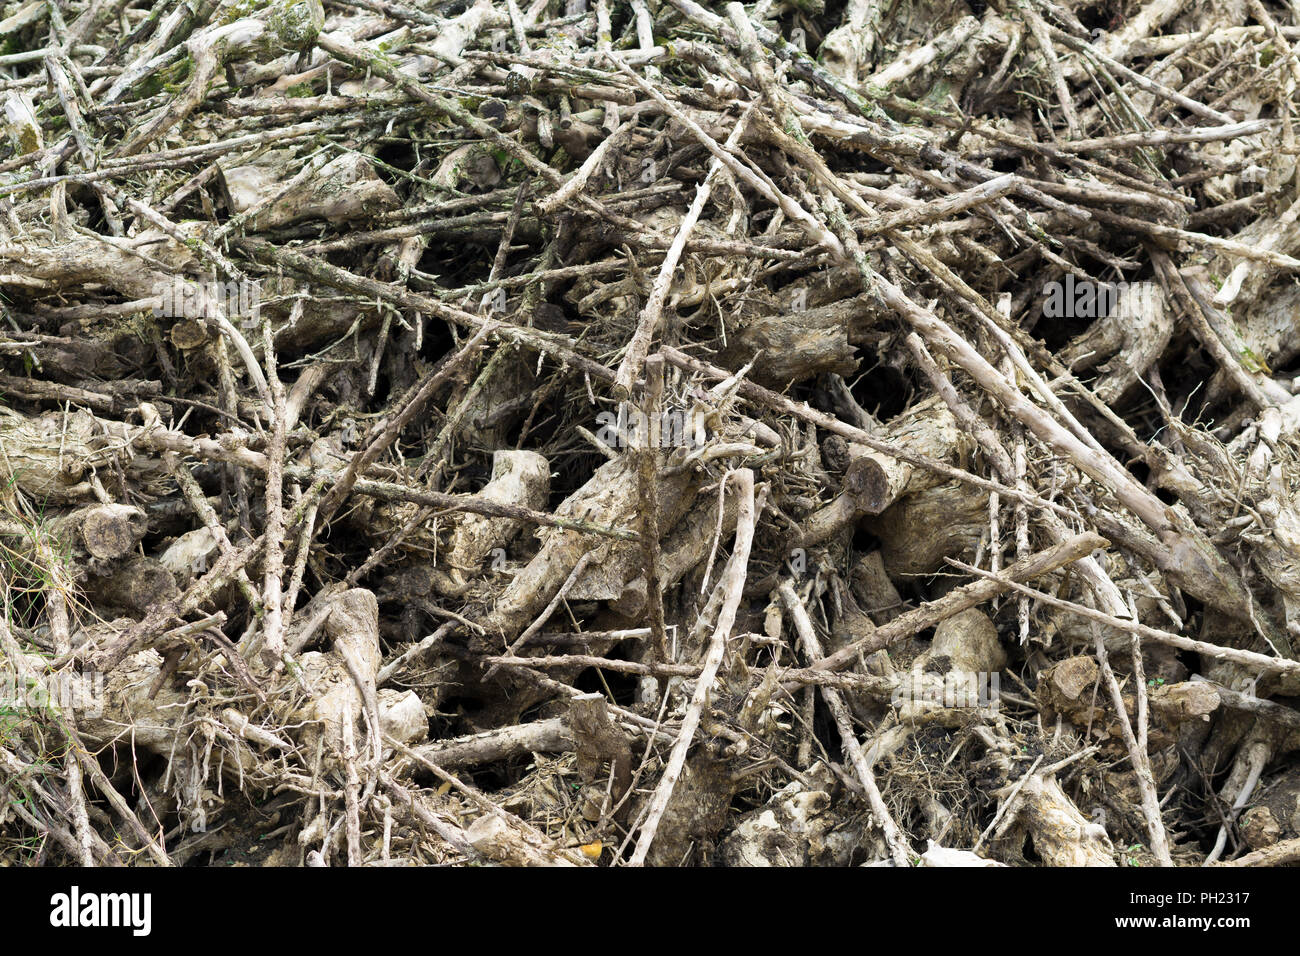 Dry Rotten Branches Pile in Farm Stock Photo